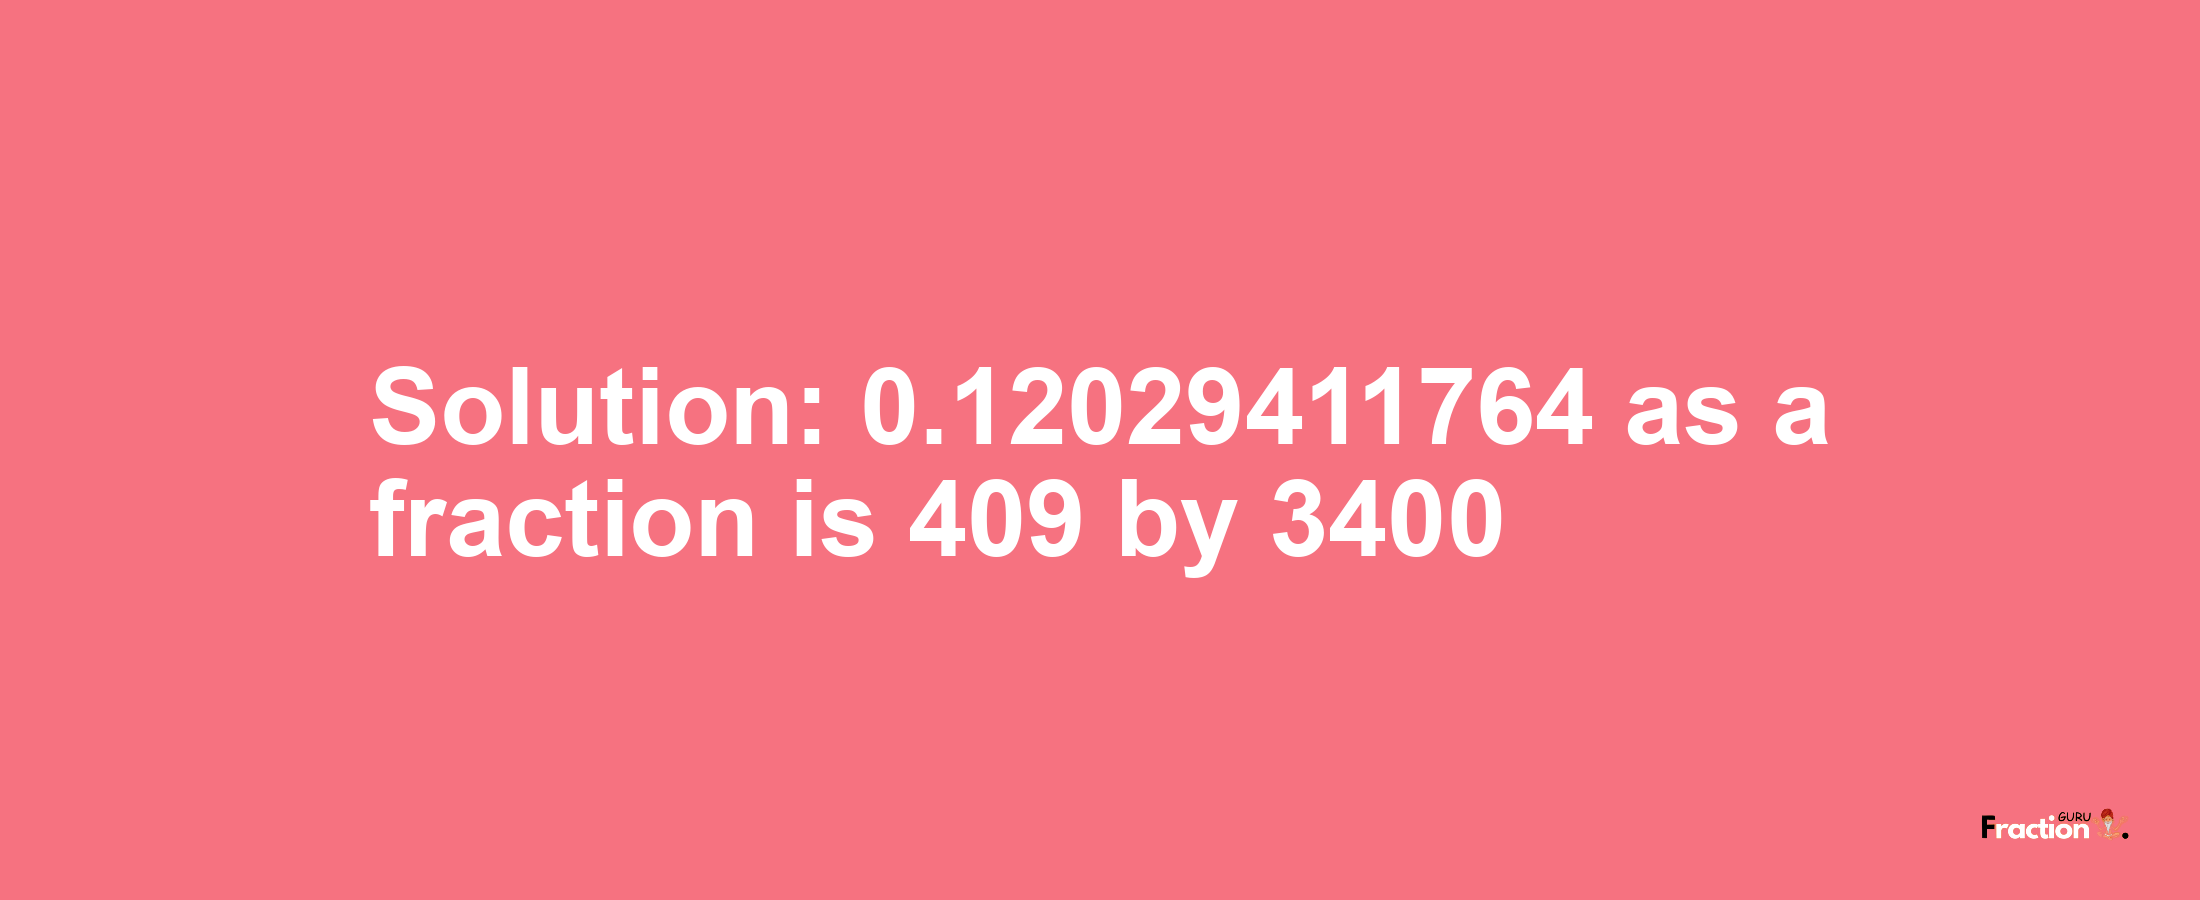 Solution:0.12029411764 as a fraction is 409/3400